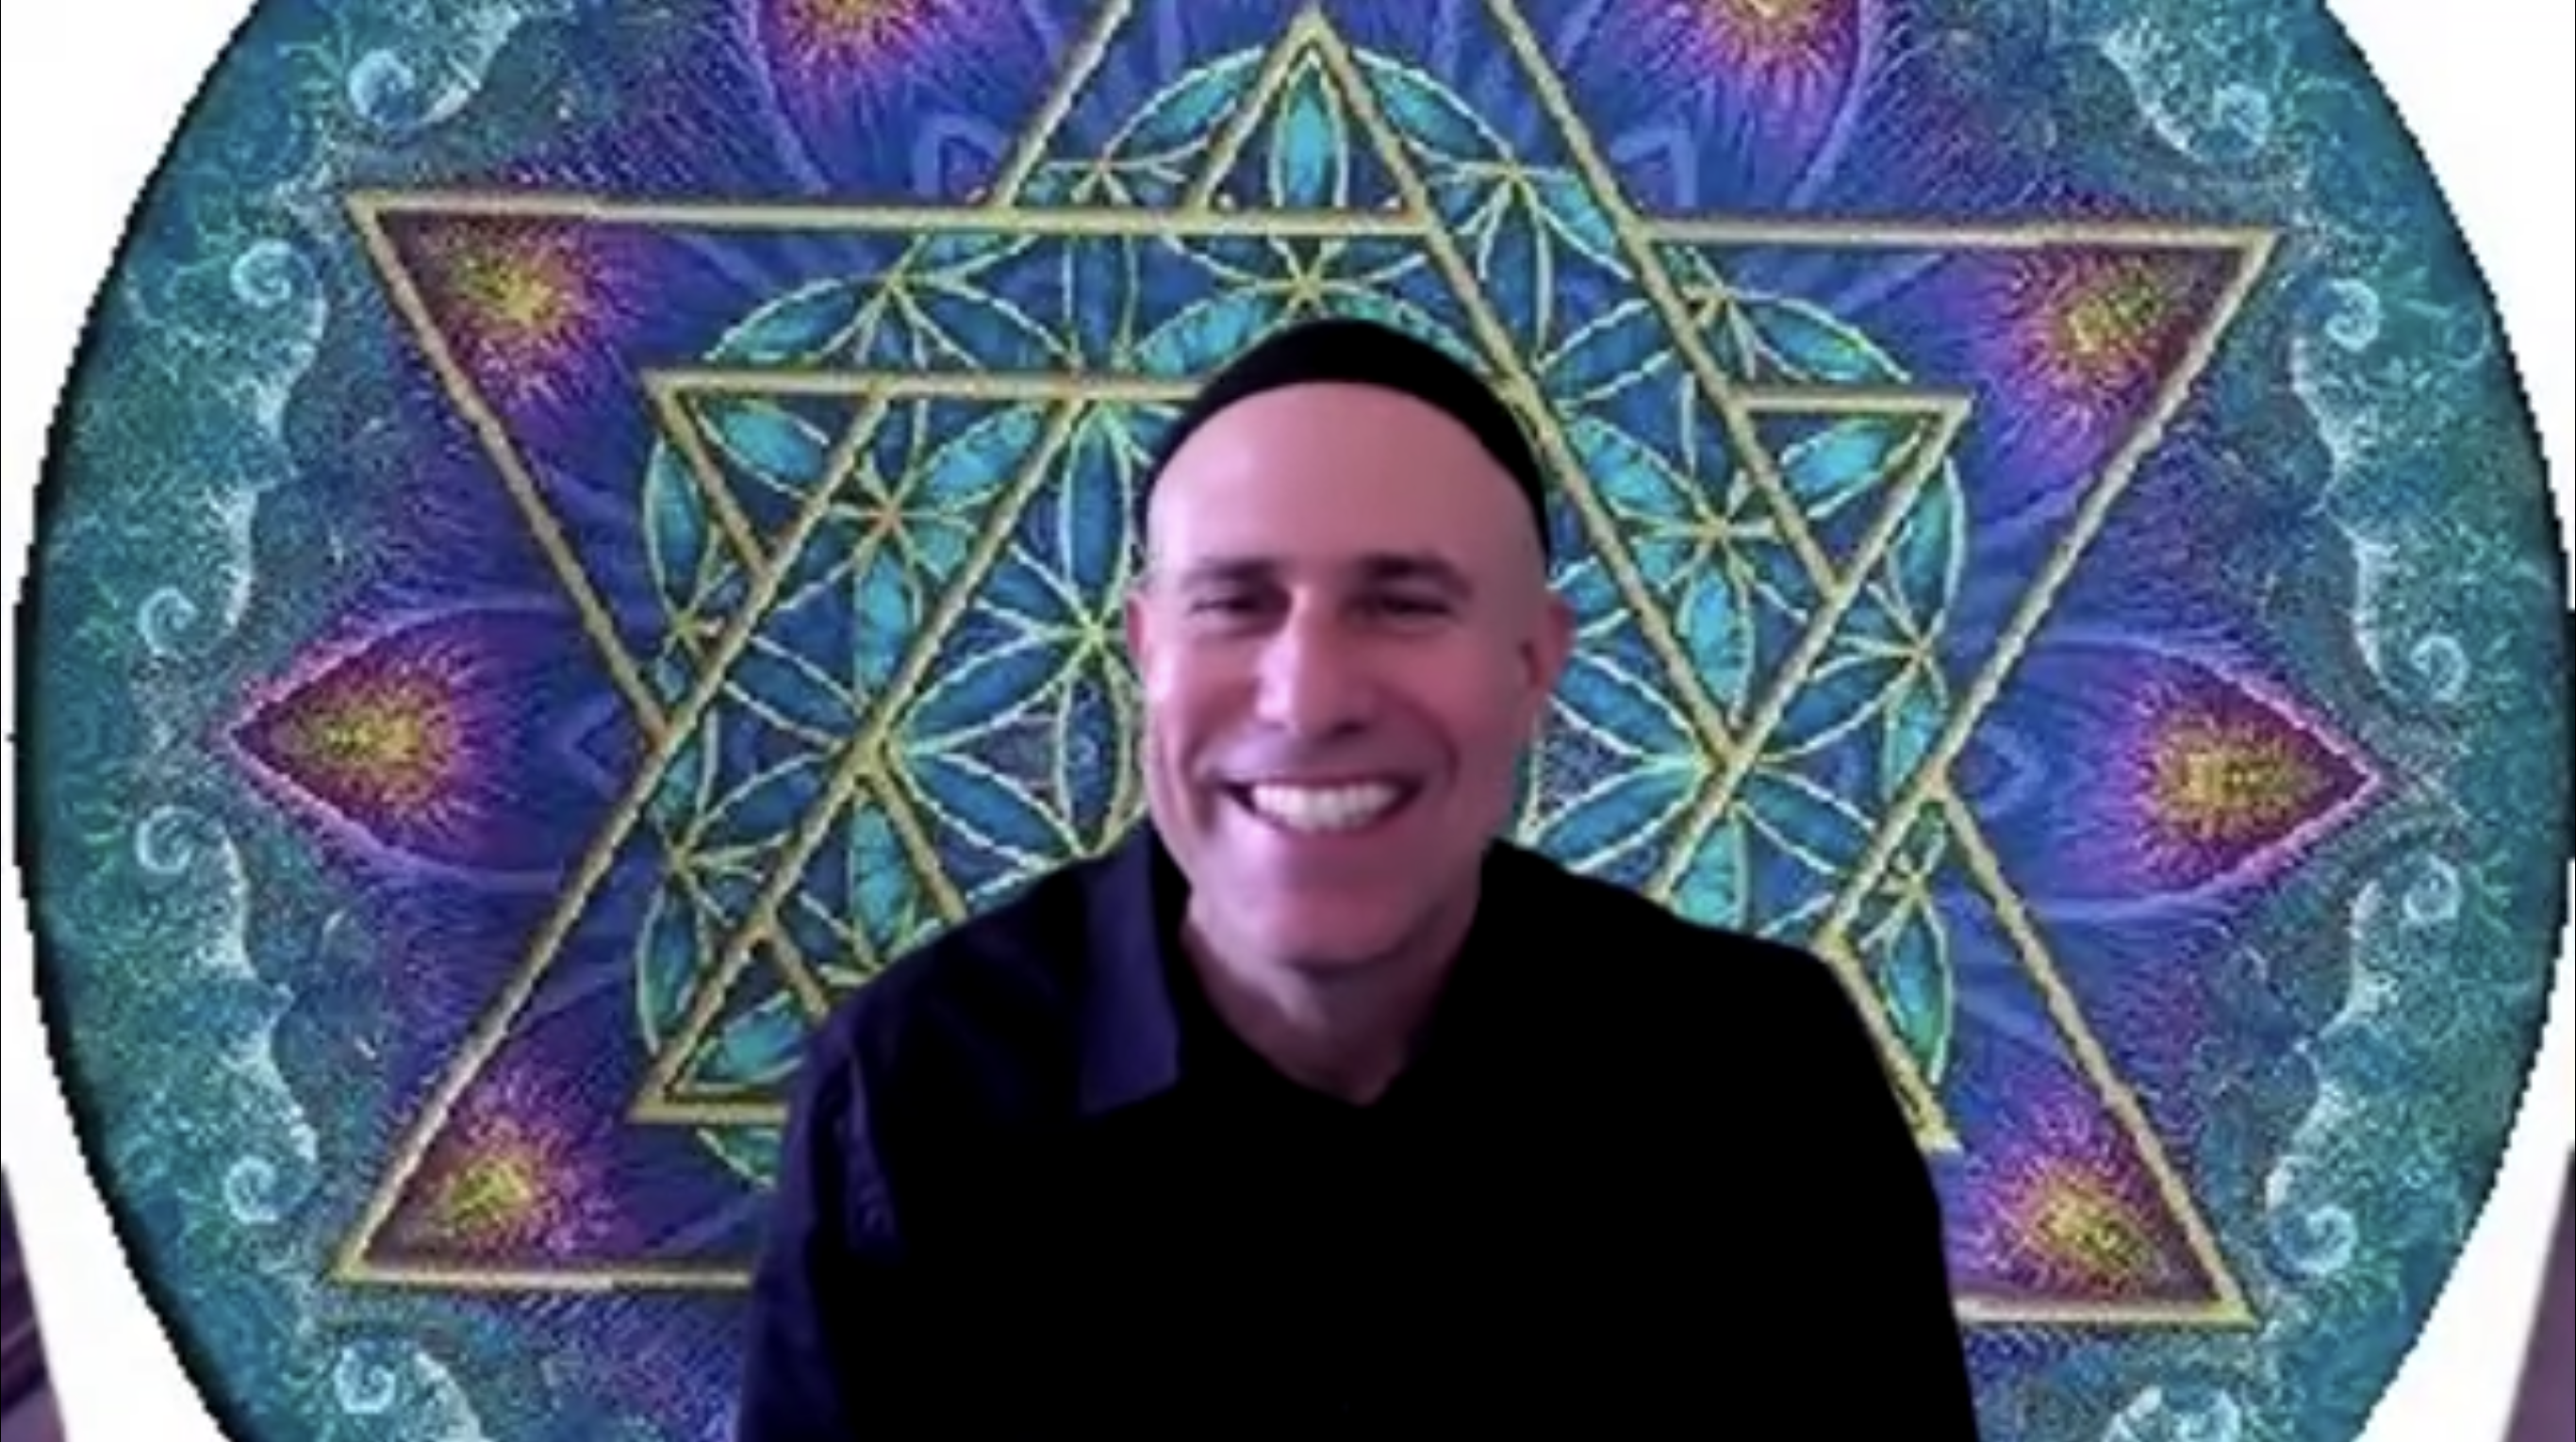 K'vod's meditation and spiritual practice in 'A Meditative Approach to Passover' YouTube video.